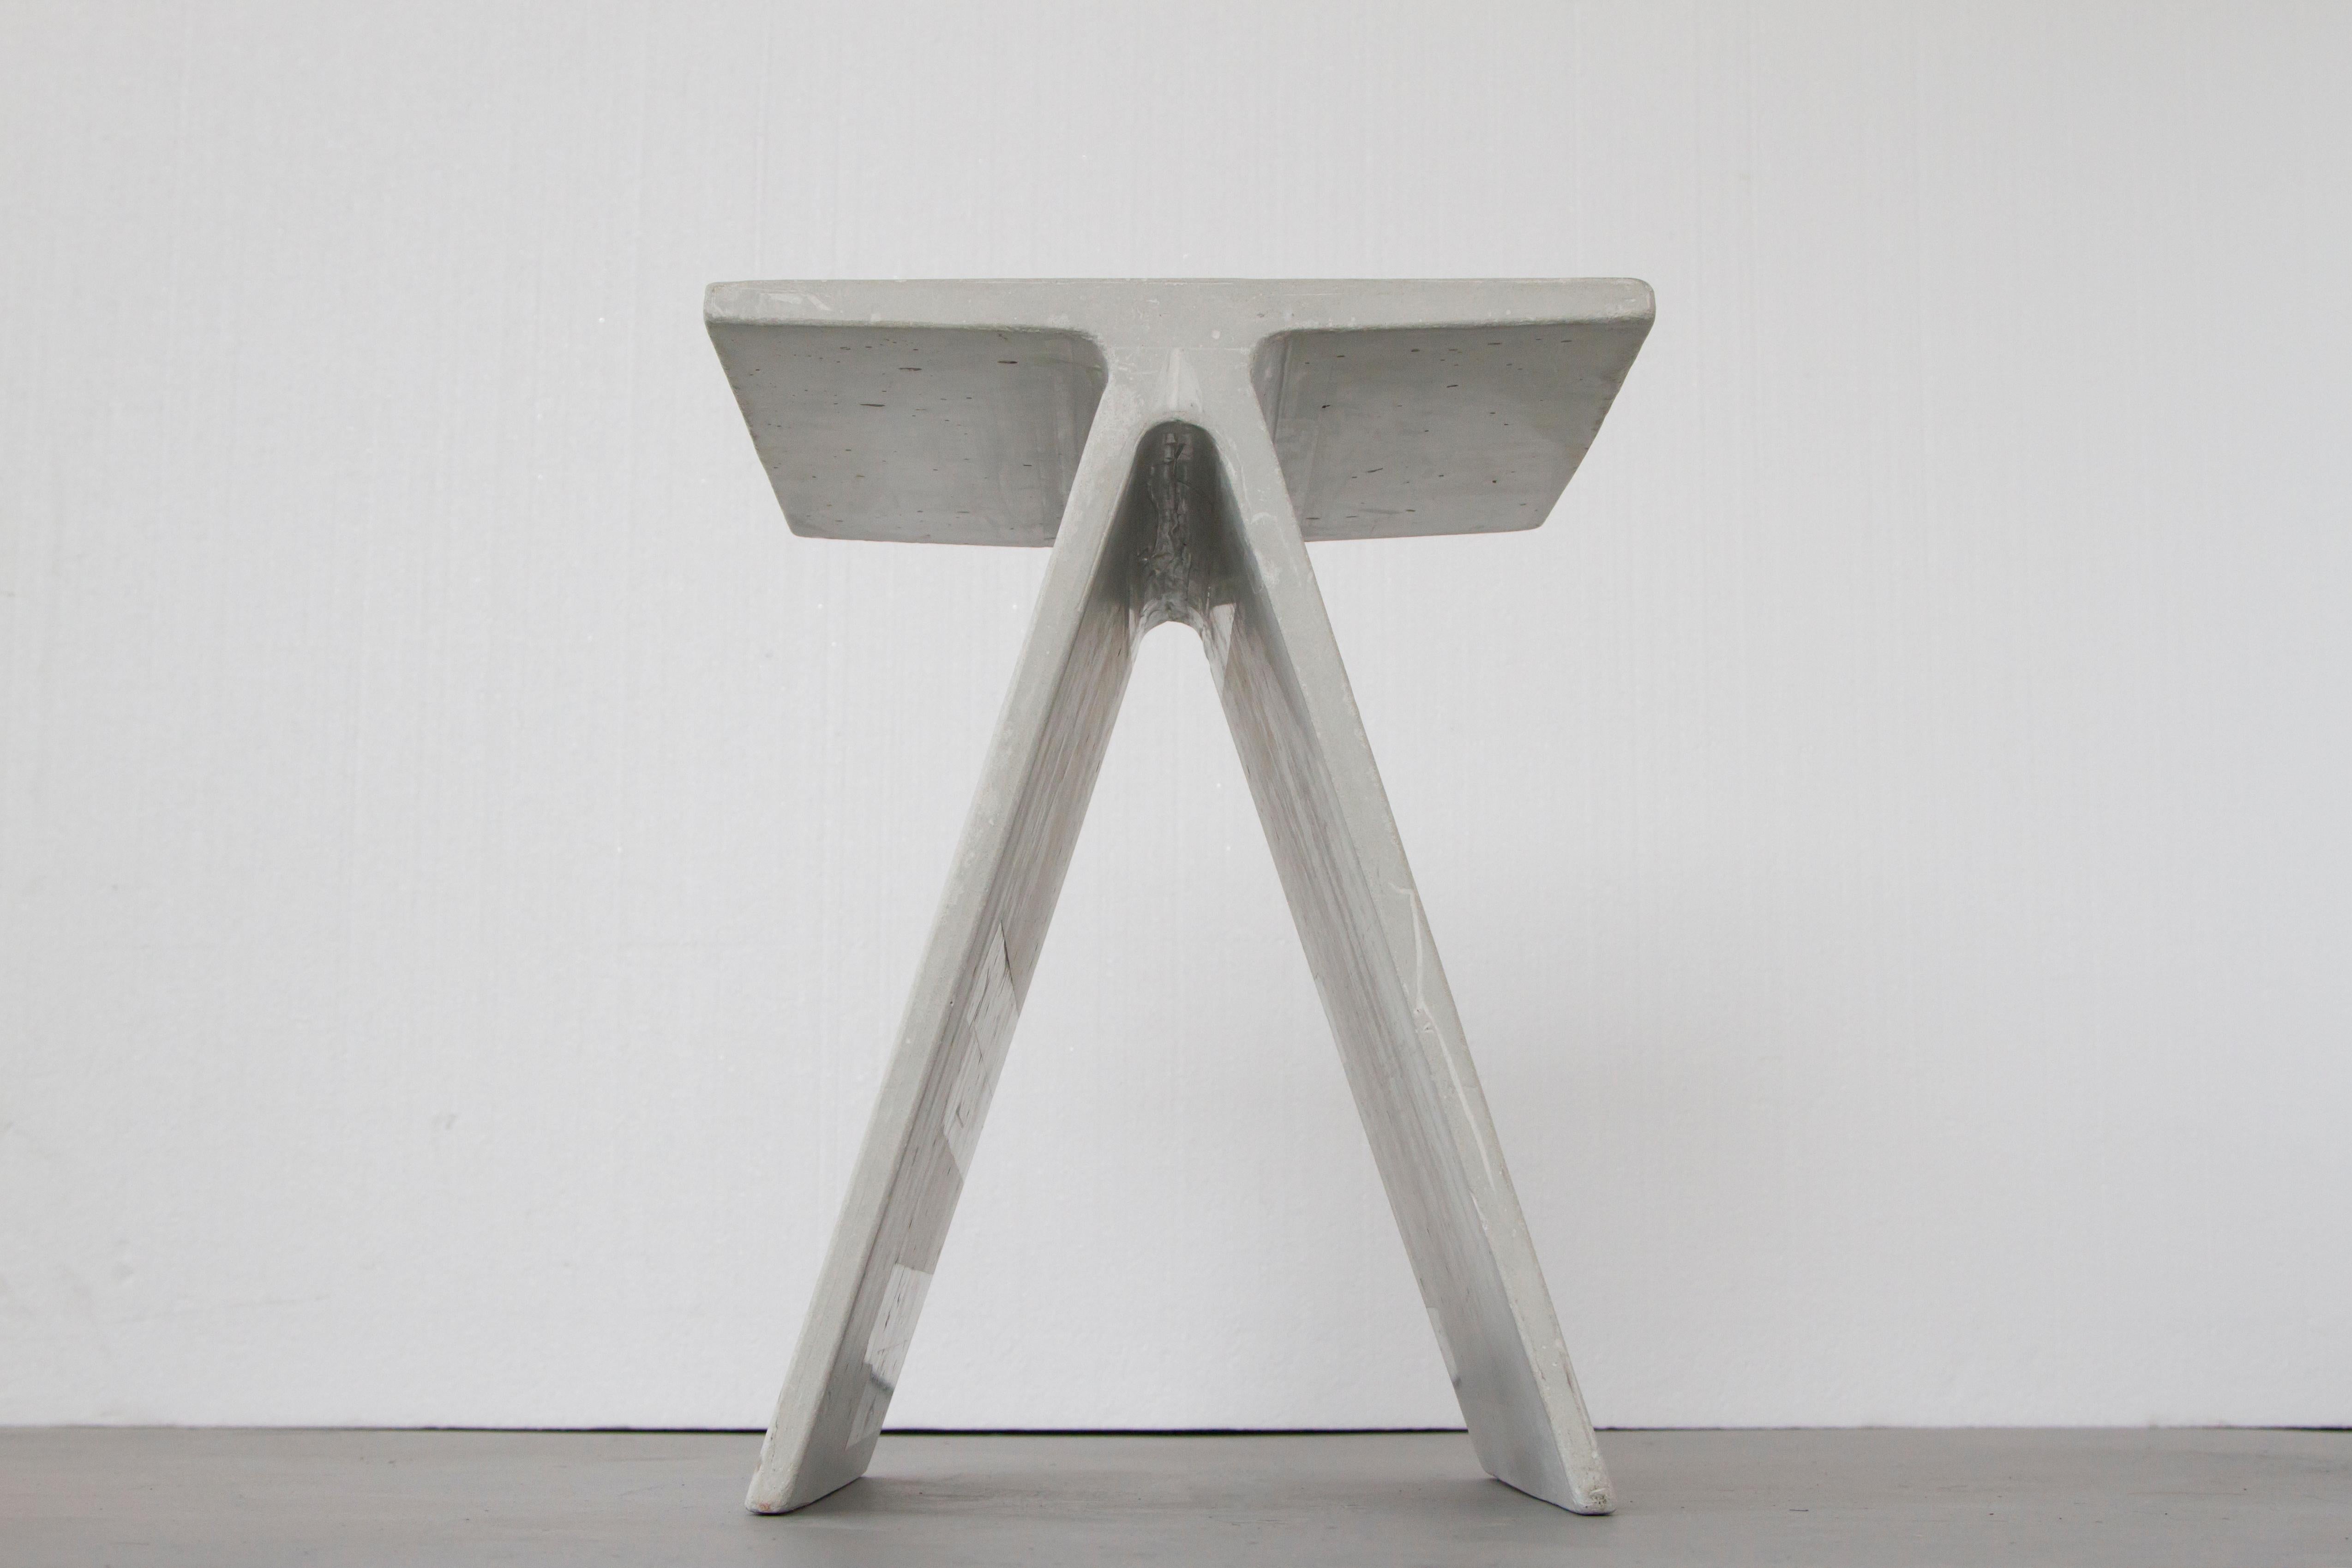 Alpha Q End Table or Stool, White Concrete for Indoor or Outdoor by Mtharu (Minimalistisch) im Angebot